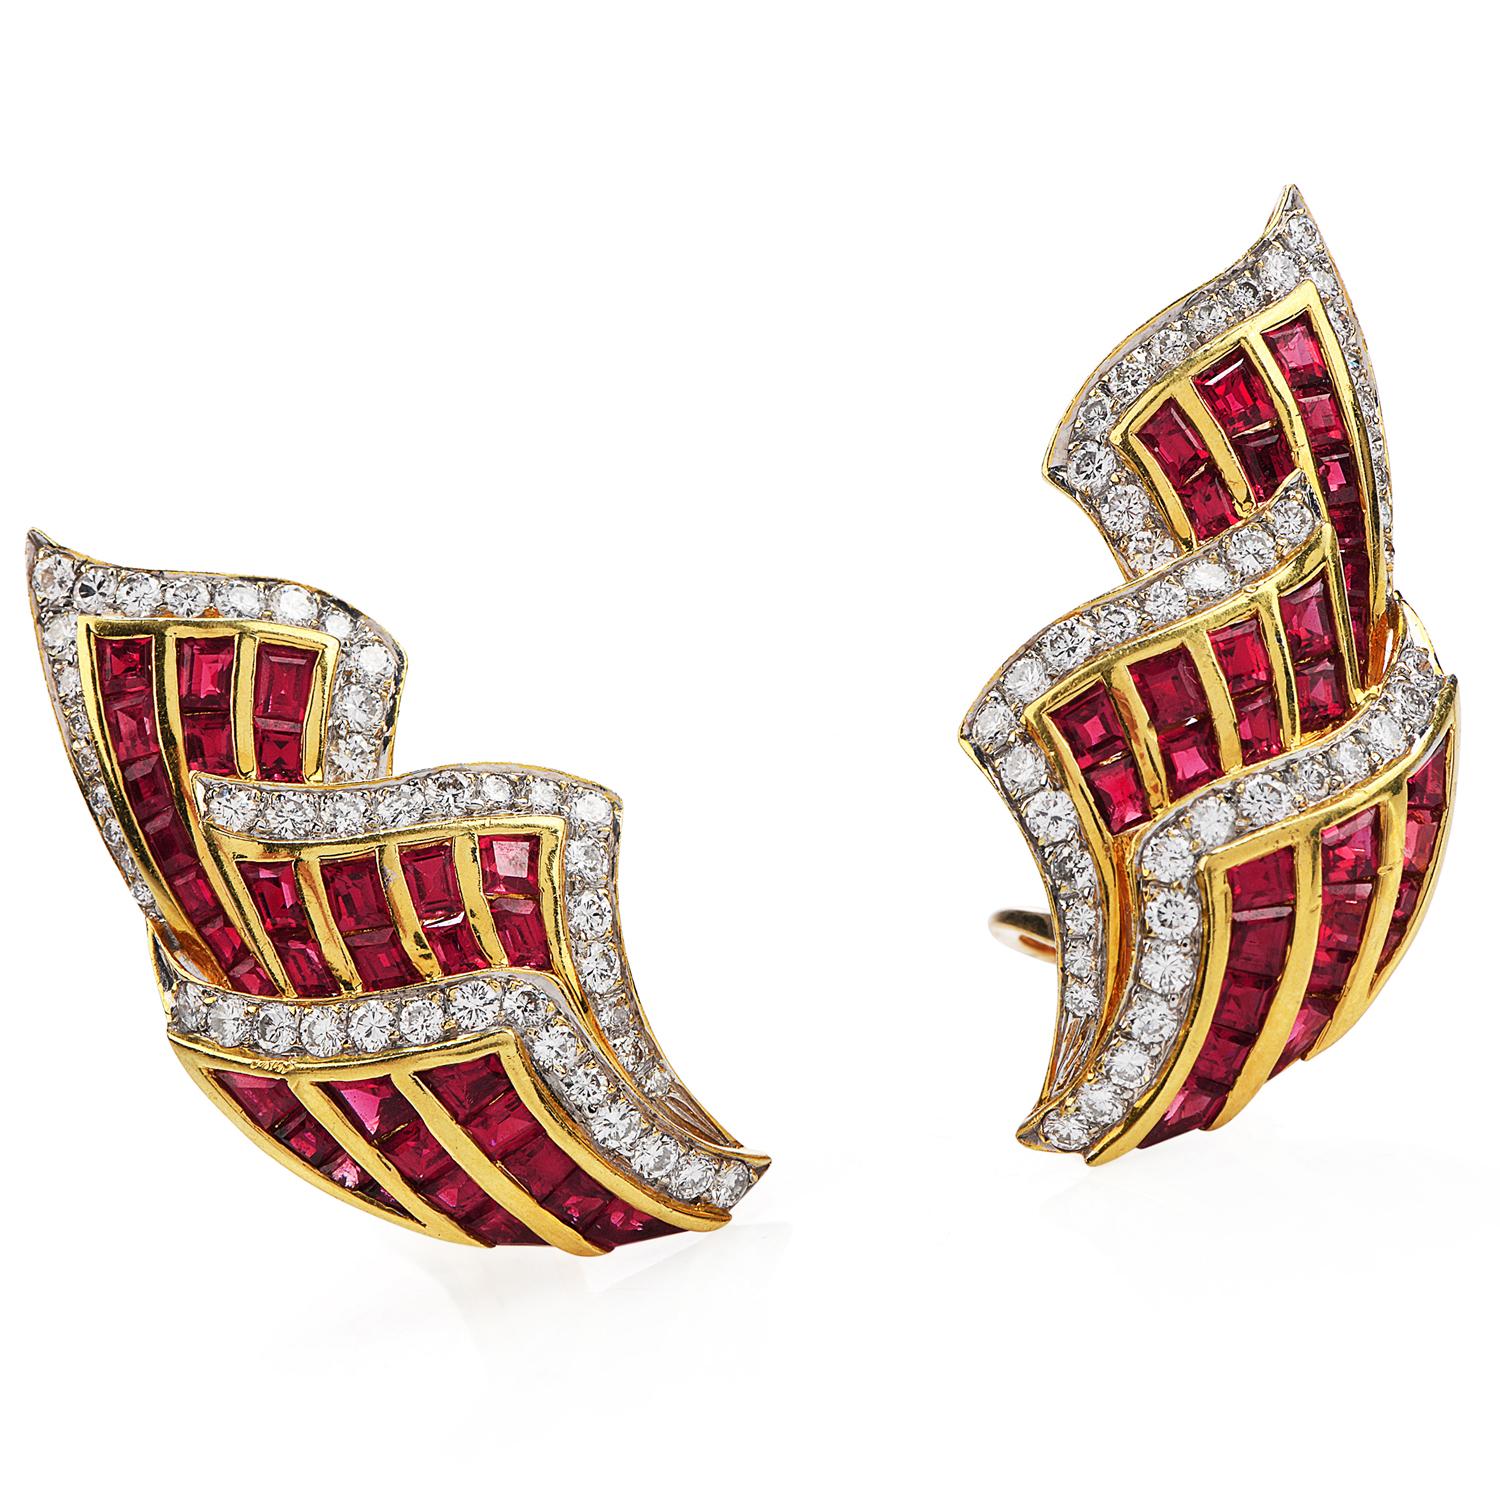 These stunning late 20th century Earrings are crafted in Solid 18K Yellow Gold,

weigh 19.6 grams and measure 38 mm long by 18 millimeters wide. 

They are perfectly detailed and inspired in overlapped ribbon design!

Surrounding each piece there